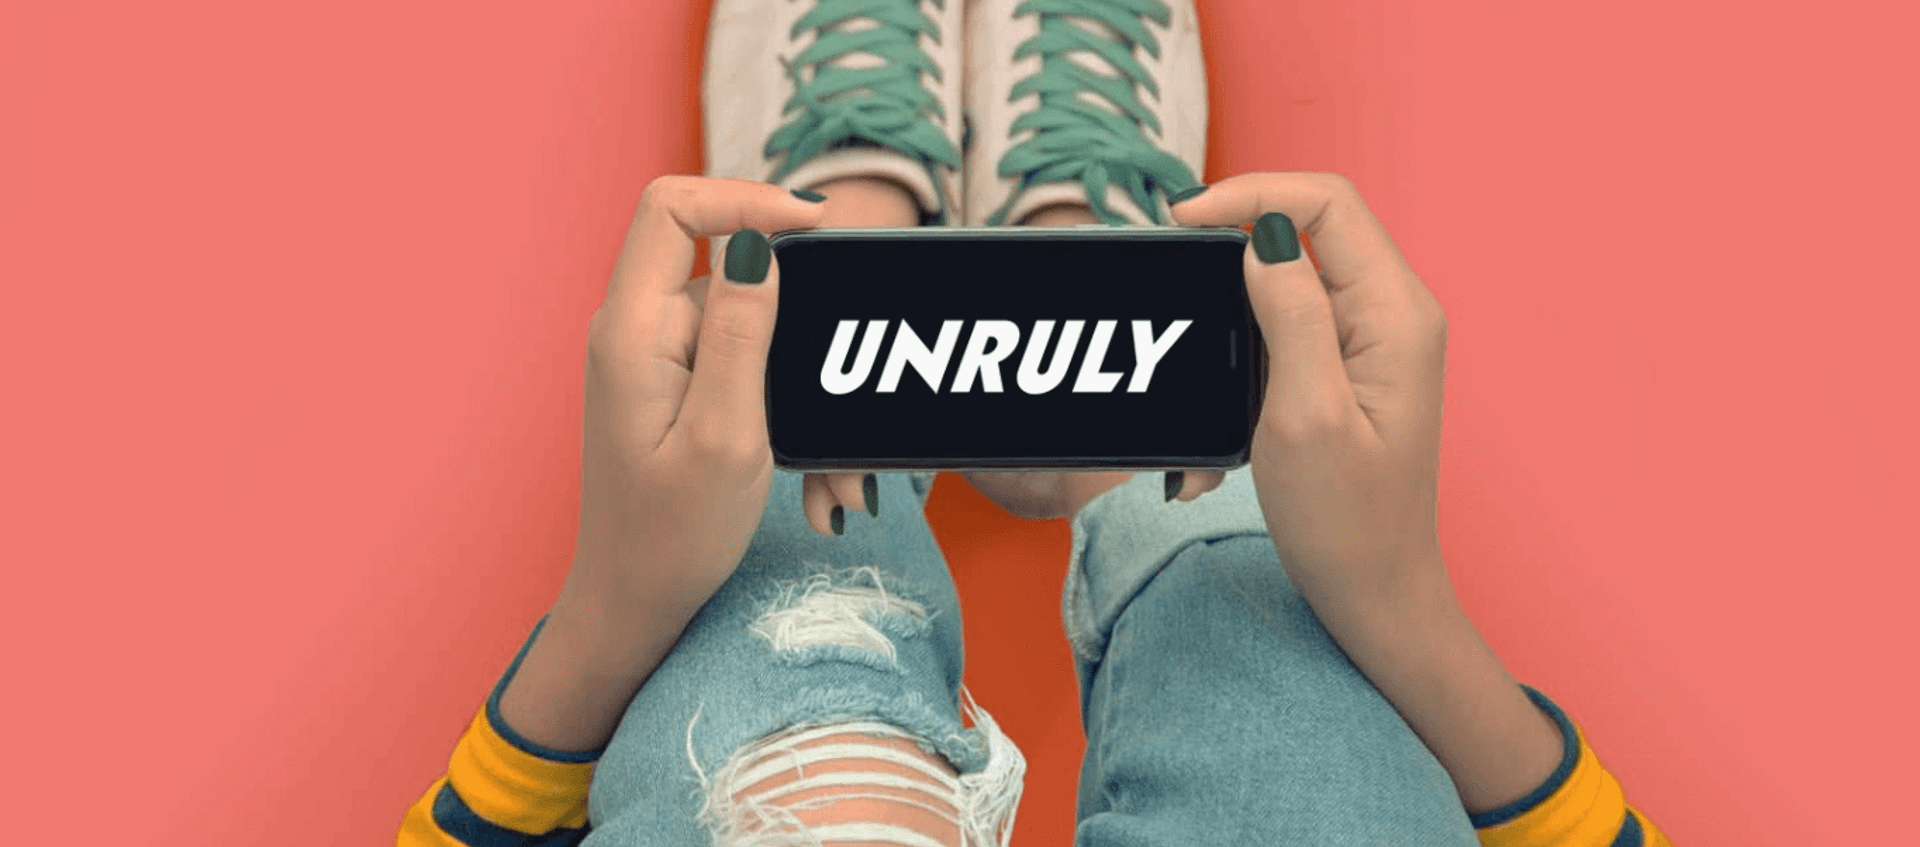 sites of Christmas: Unruly